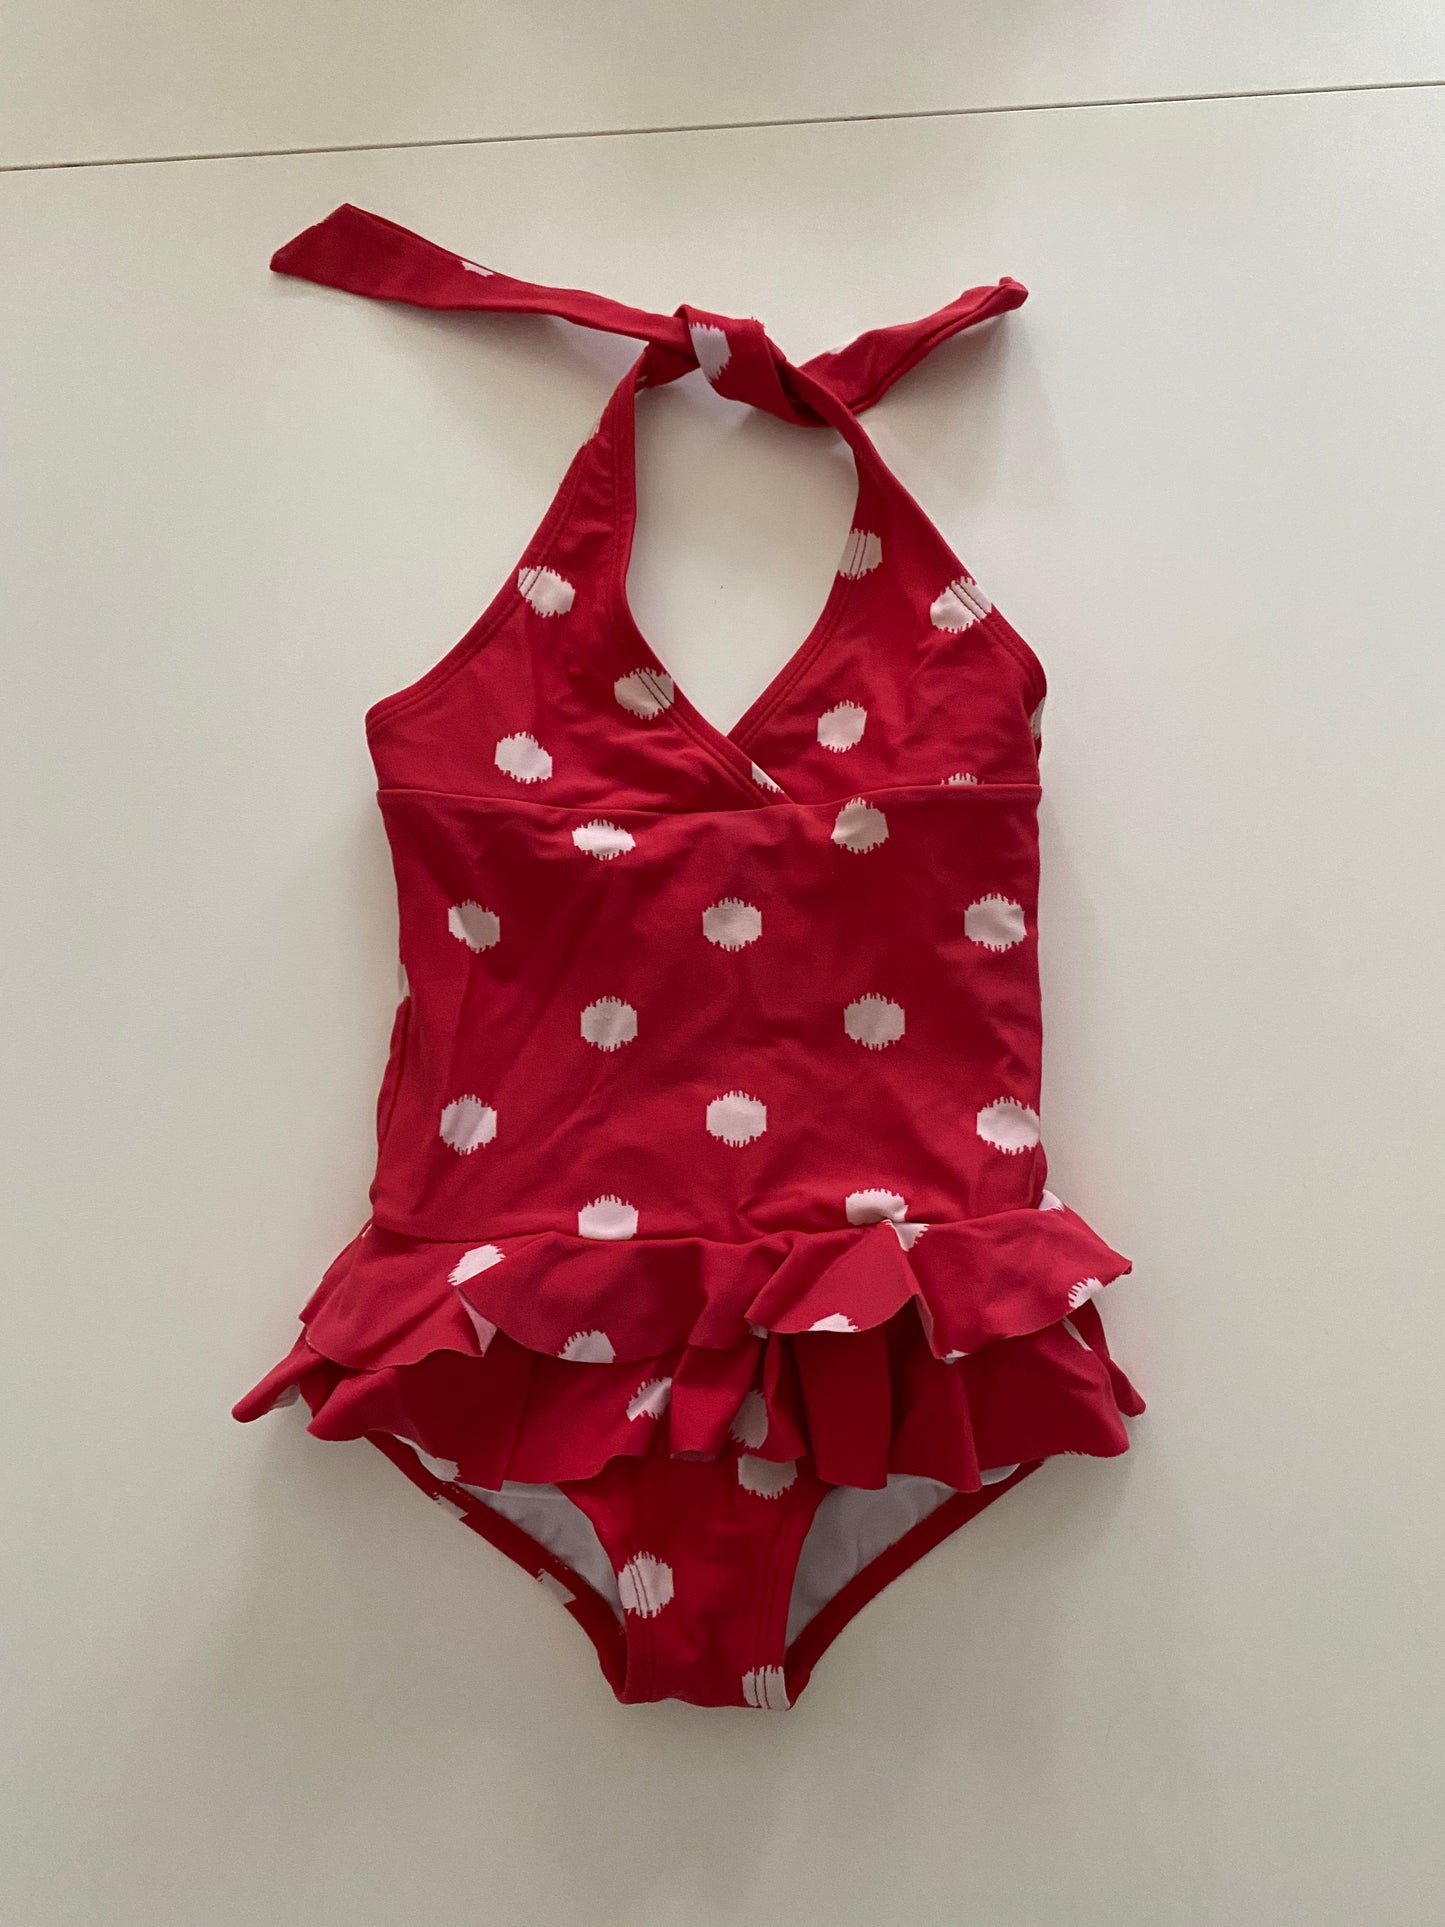 Hanna Andersson Swim Red Polka Dot Bathing Suit Girls Size 90